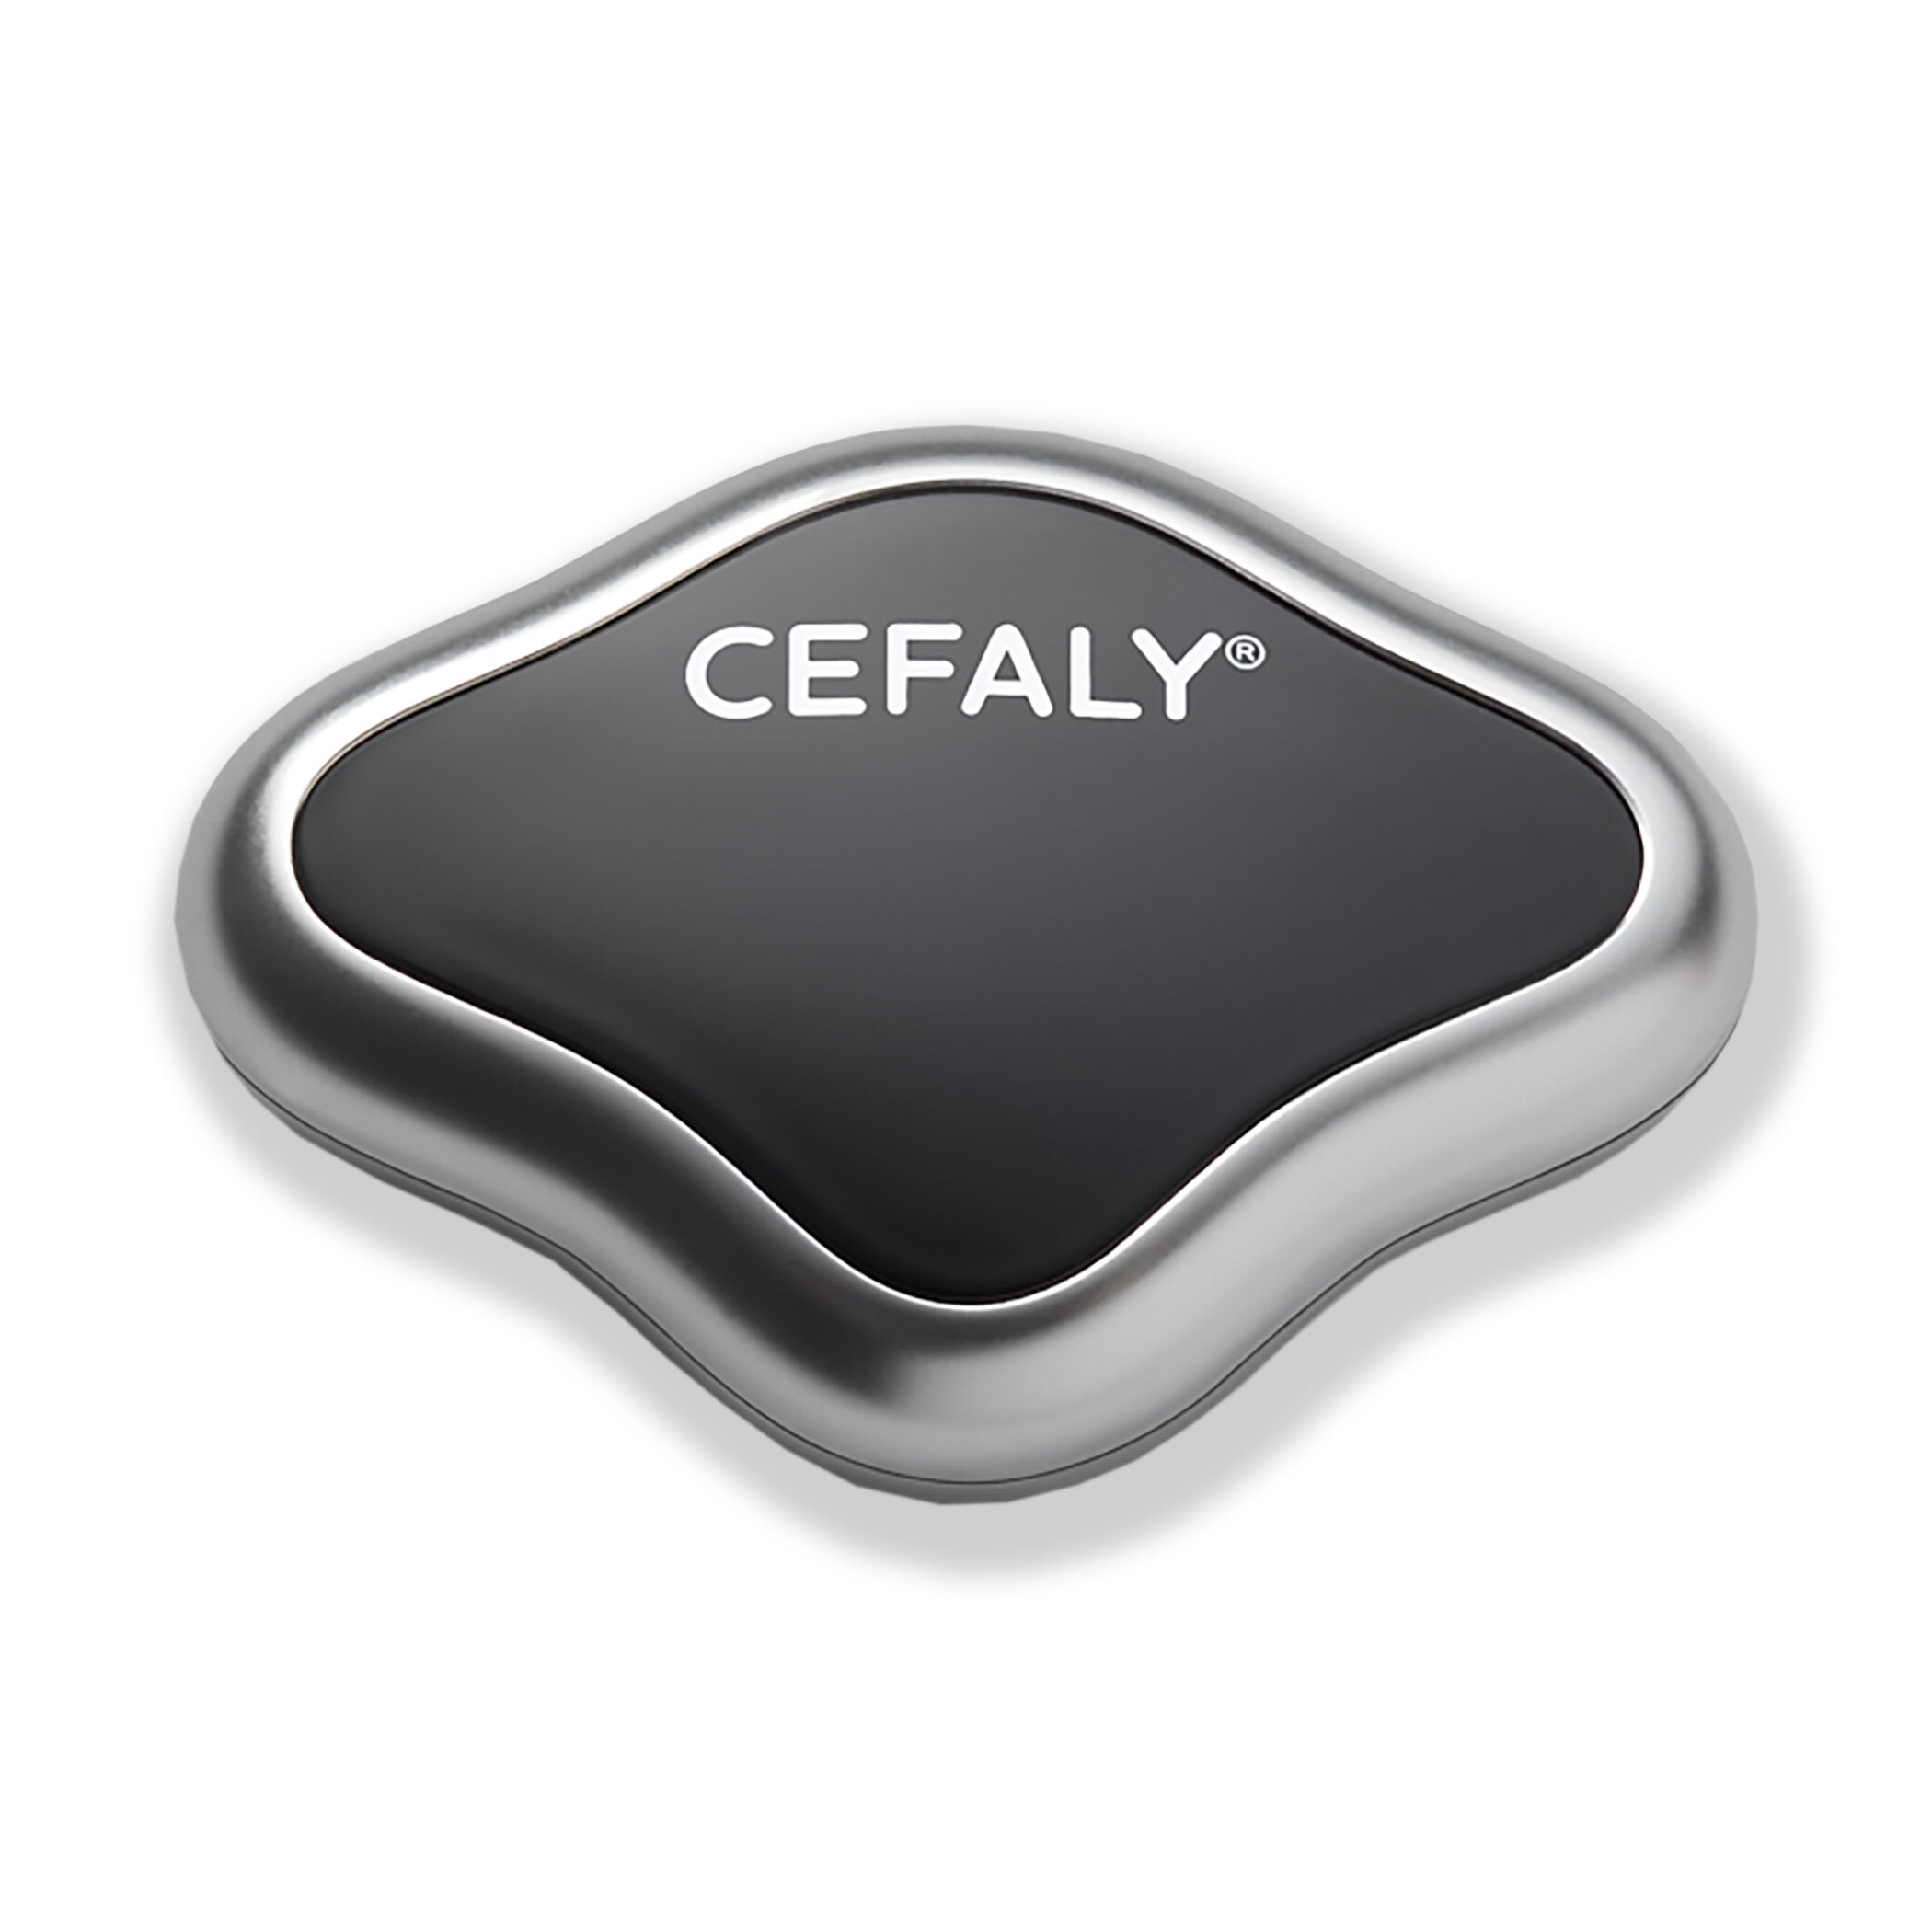  What is included with the Cefaly Migraine treatment and prevention device  1